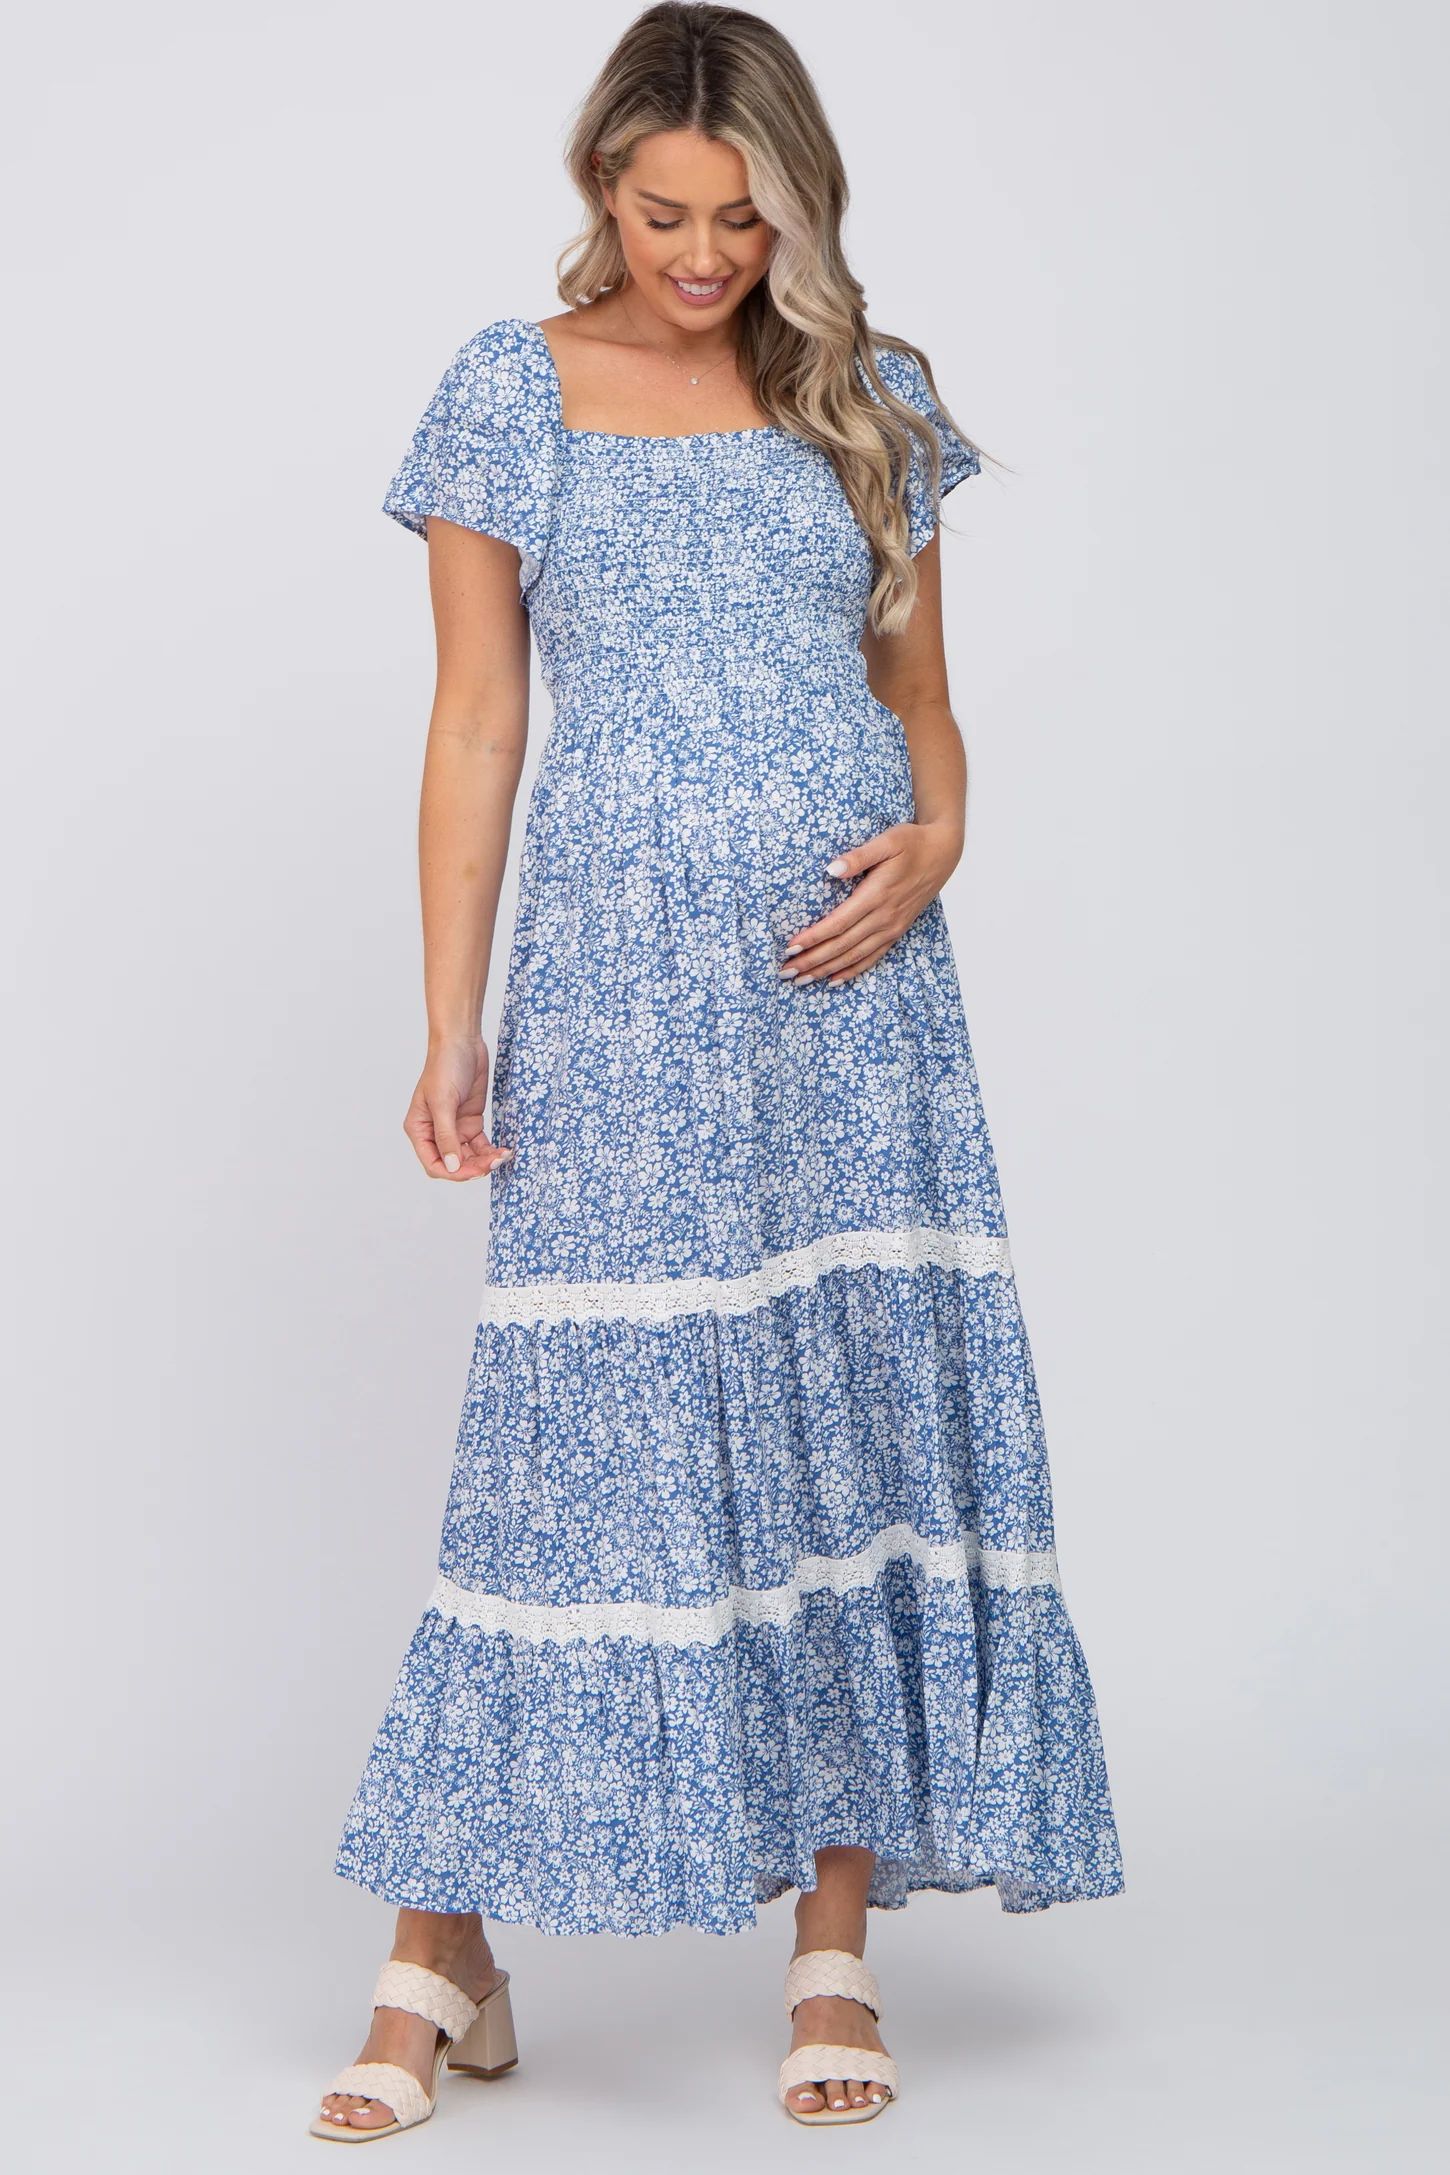 Blue Floral Square Neck Smocked Front Lace Trim Maternity Maxi Dress | PinkBlush Maternity